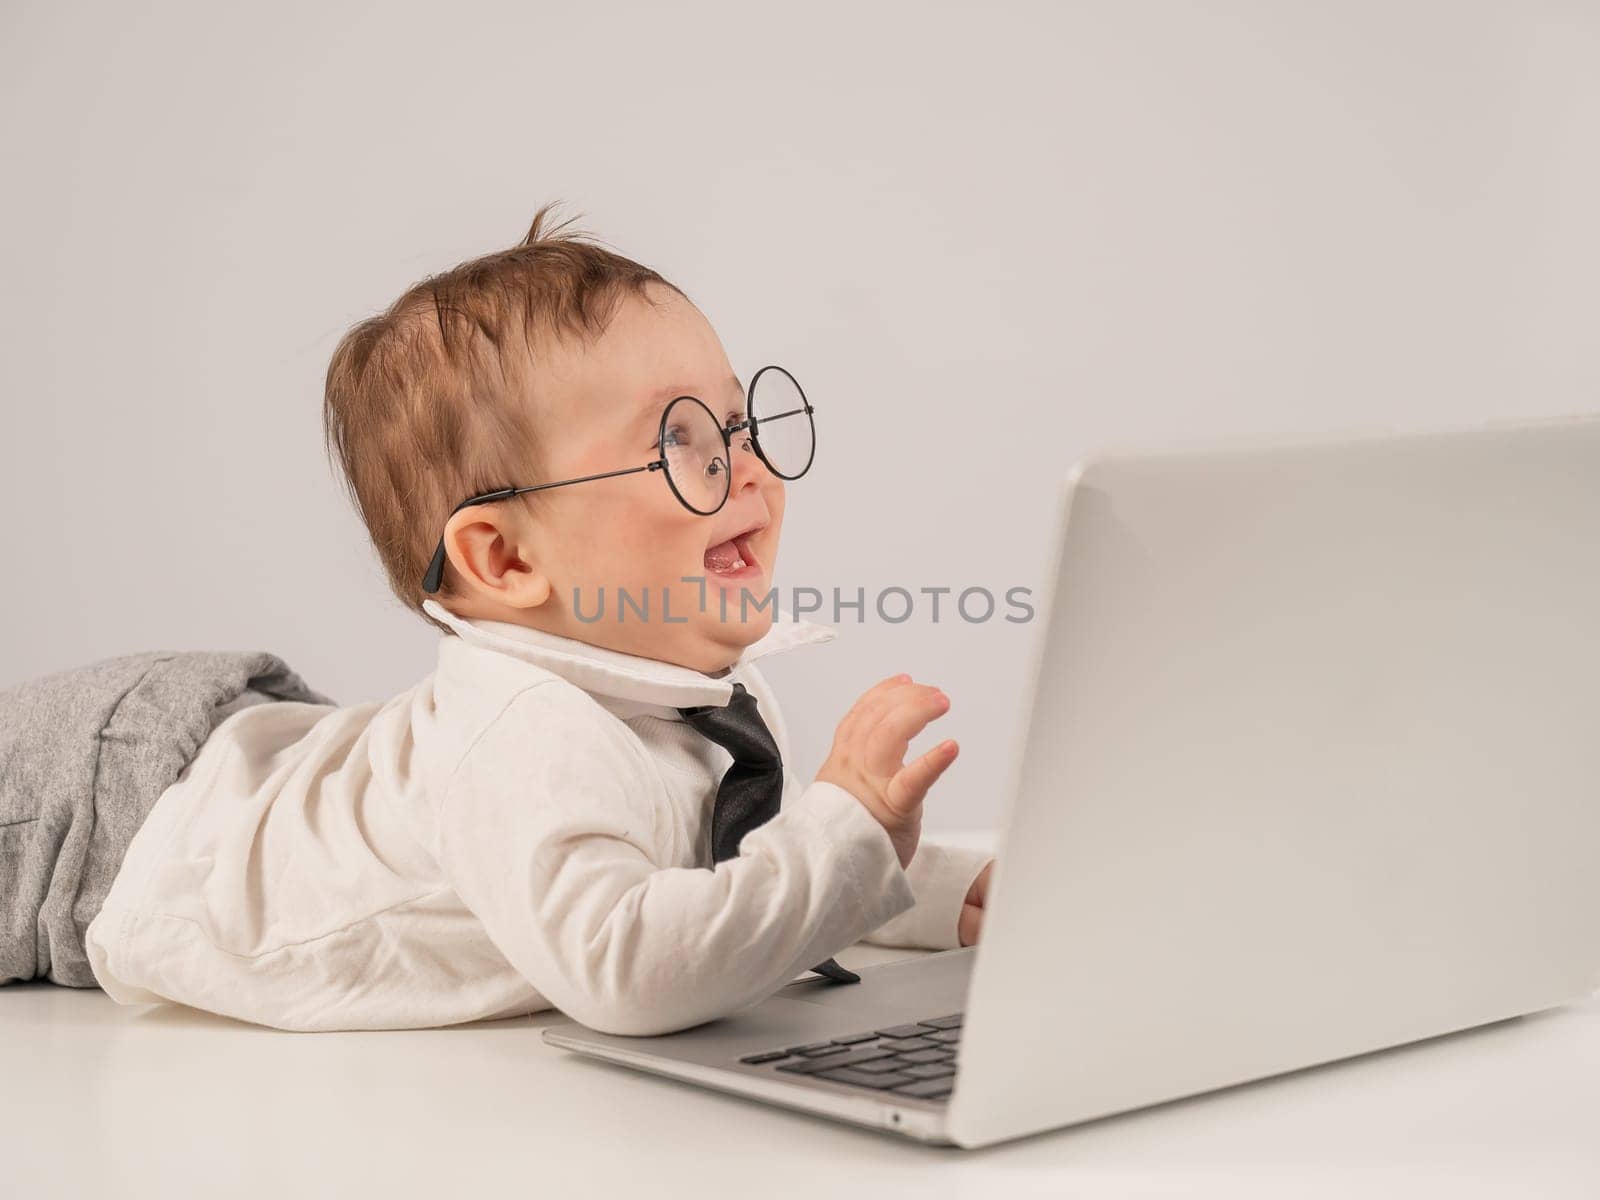 Cute baby in glasses and suit working on laptop. by mrwed54